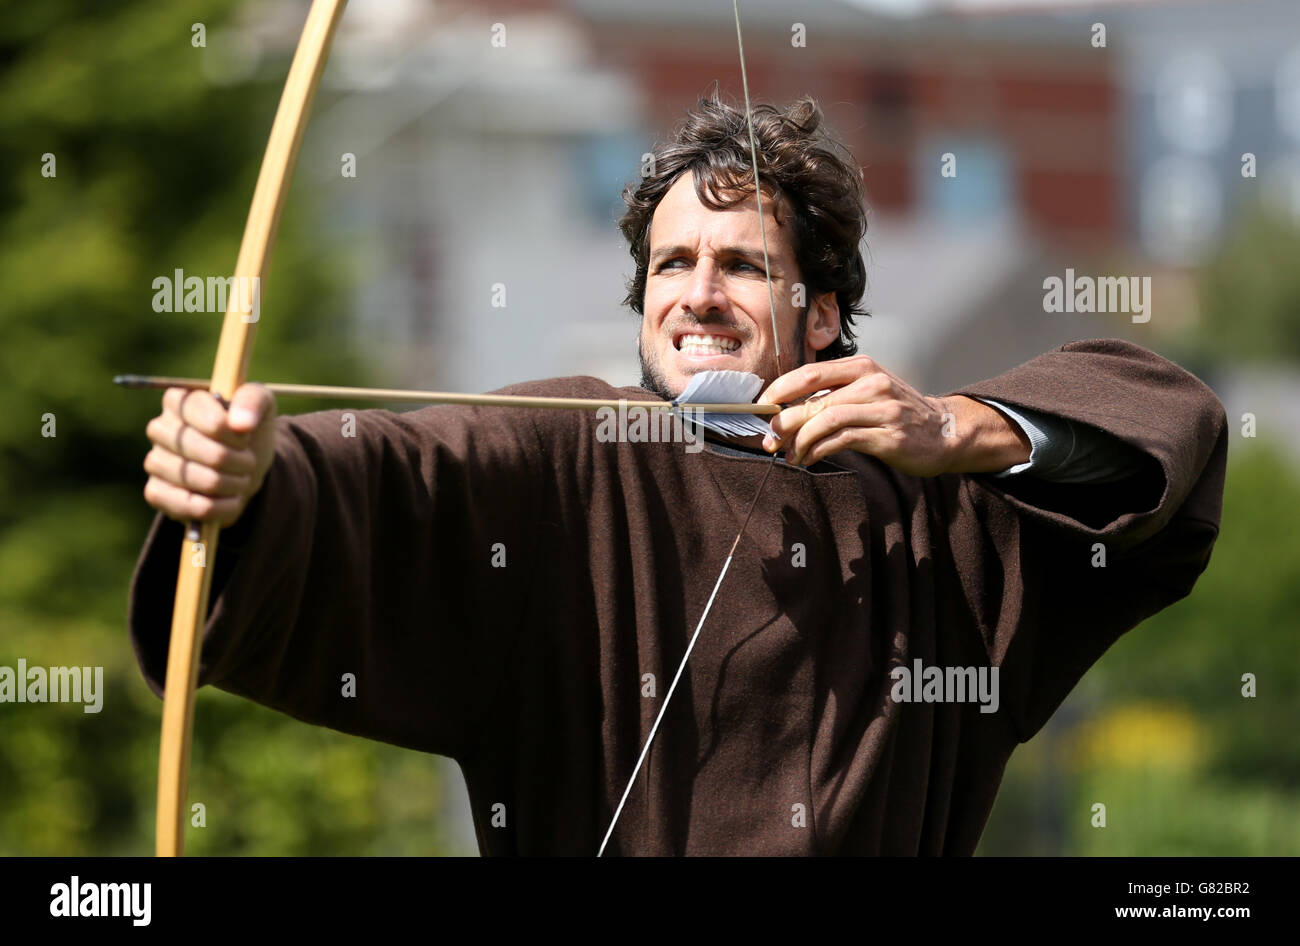 Spain's Feliciano Lopez receives an archery lesson during a photocall at Nottingham Castle, Nottingham. Stock Photo